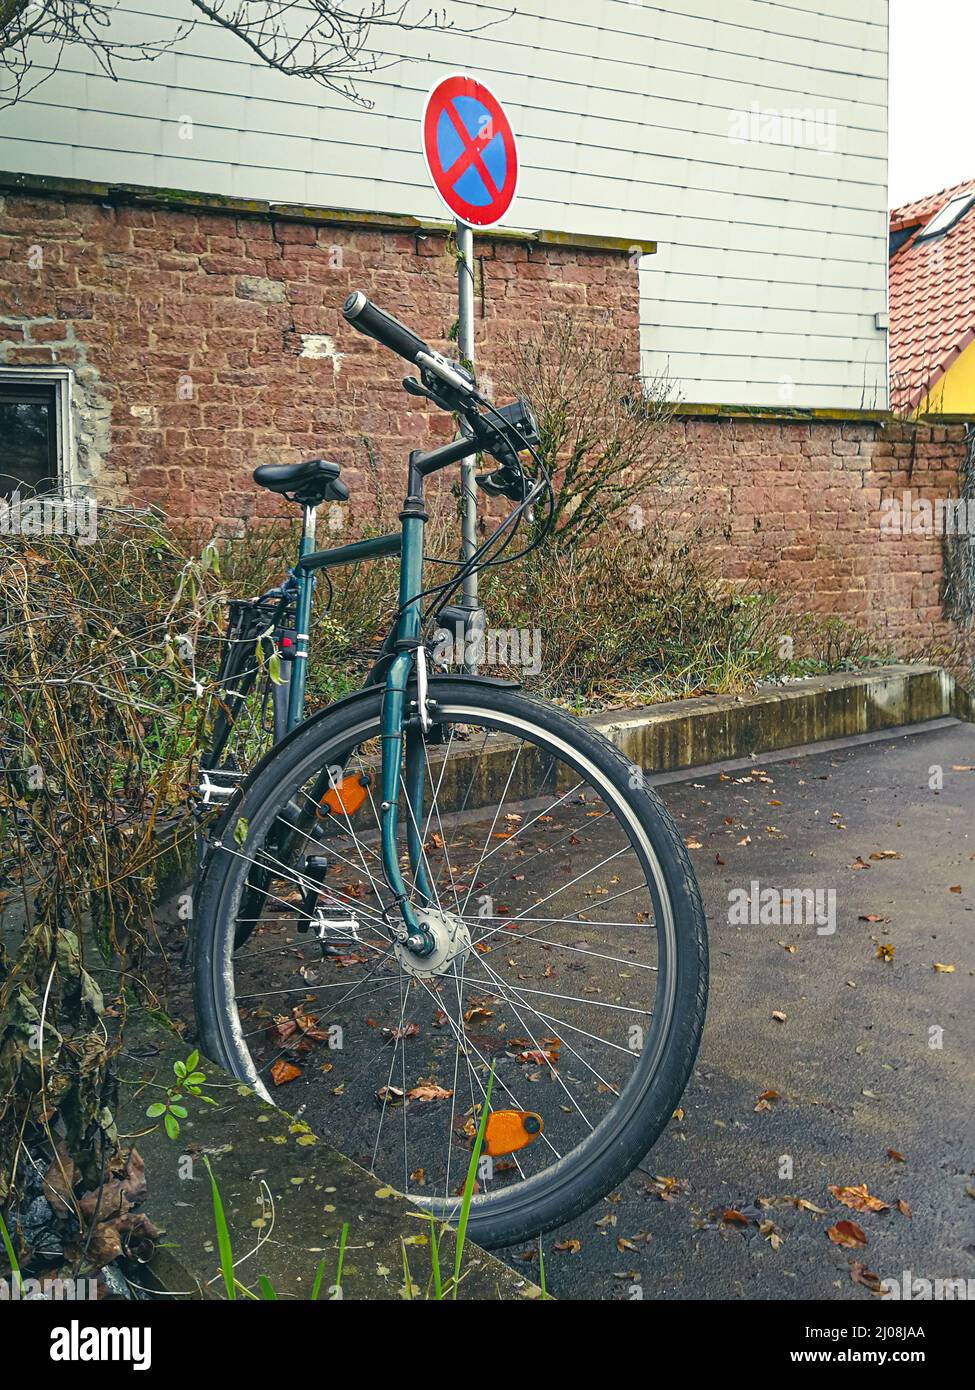 Bicycle parked in an no-stopping zone. symbolic image of parking space management problems Stock Photo